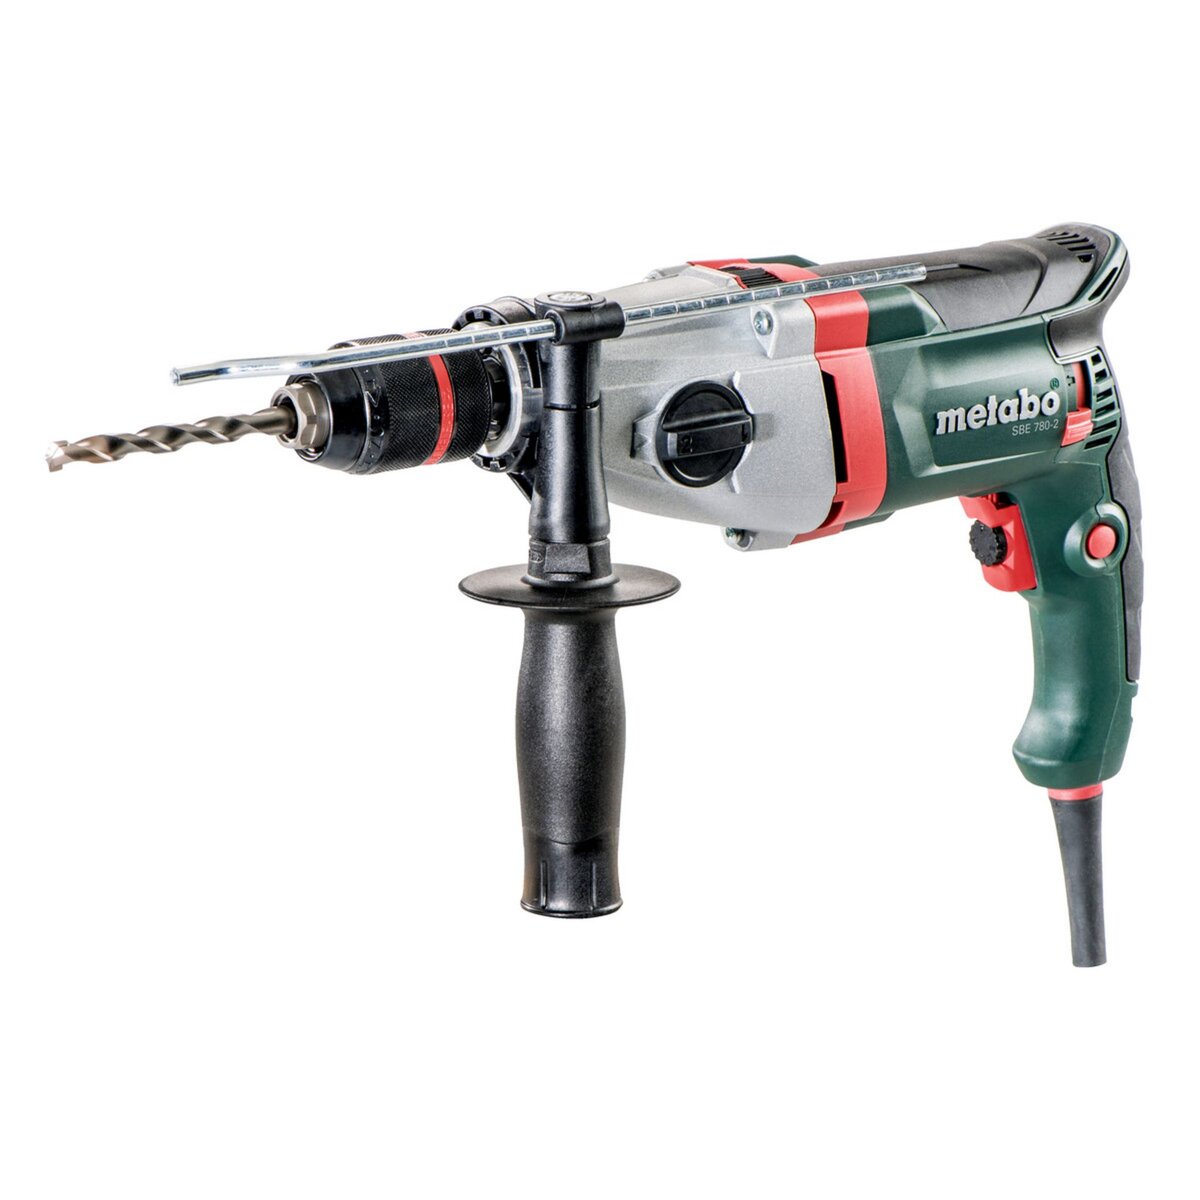 METABO SAS Perceuse à percussion filaire SBE 780-2